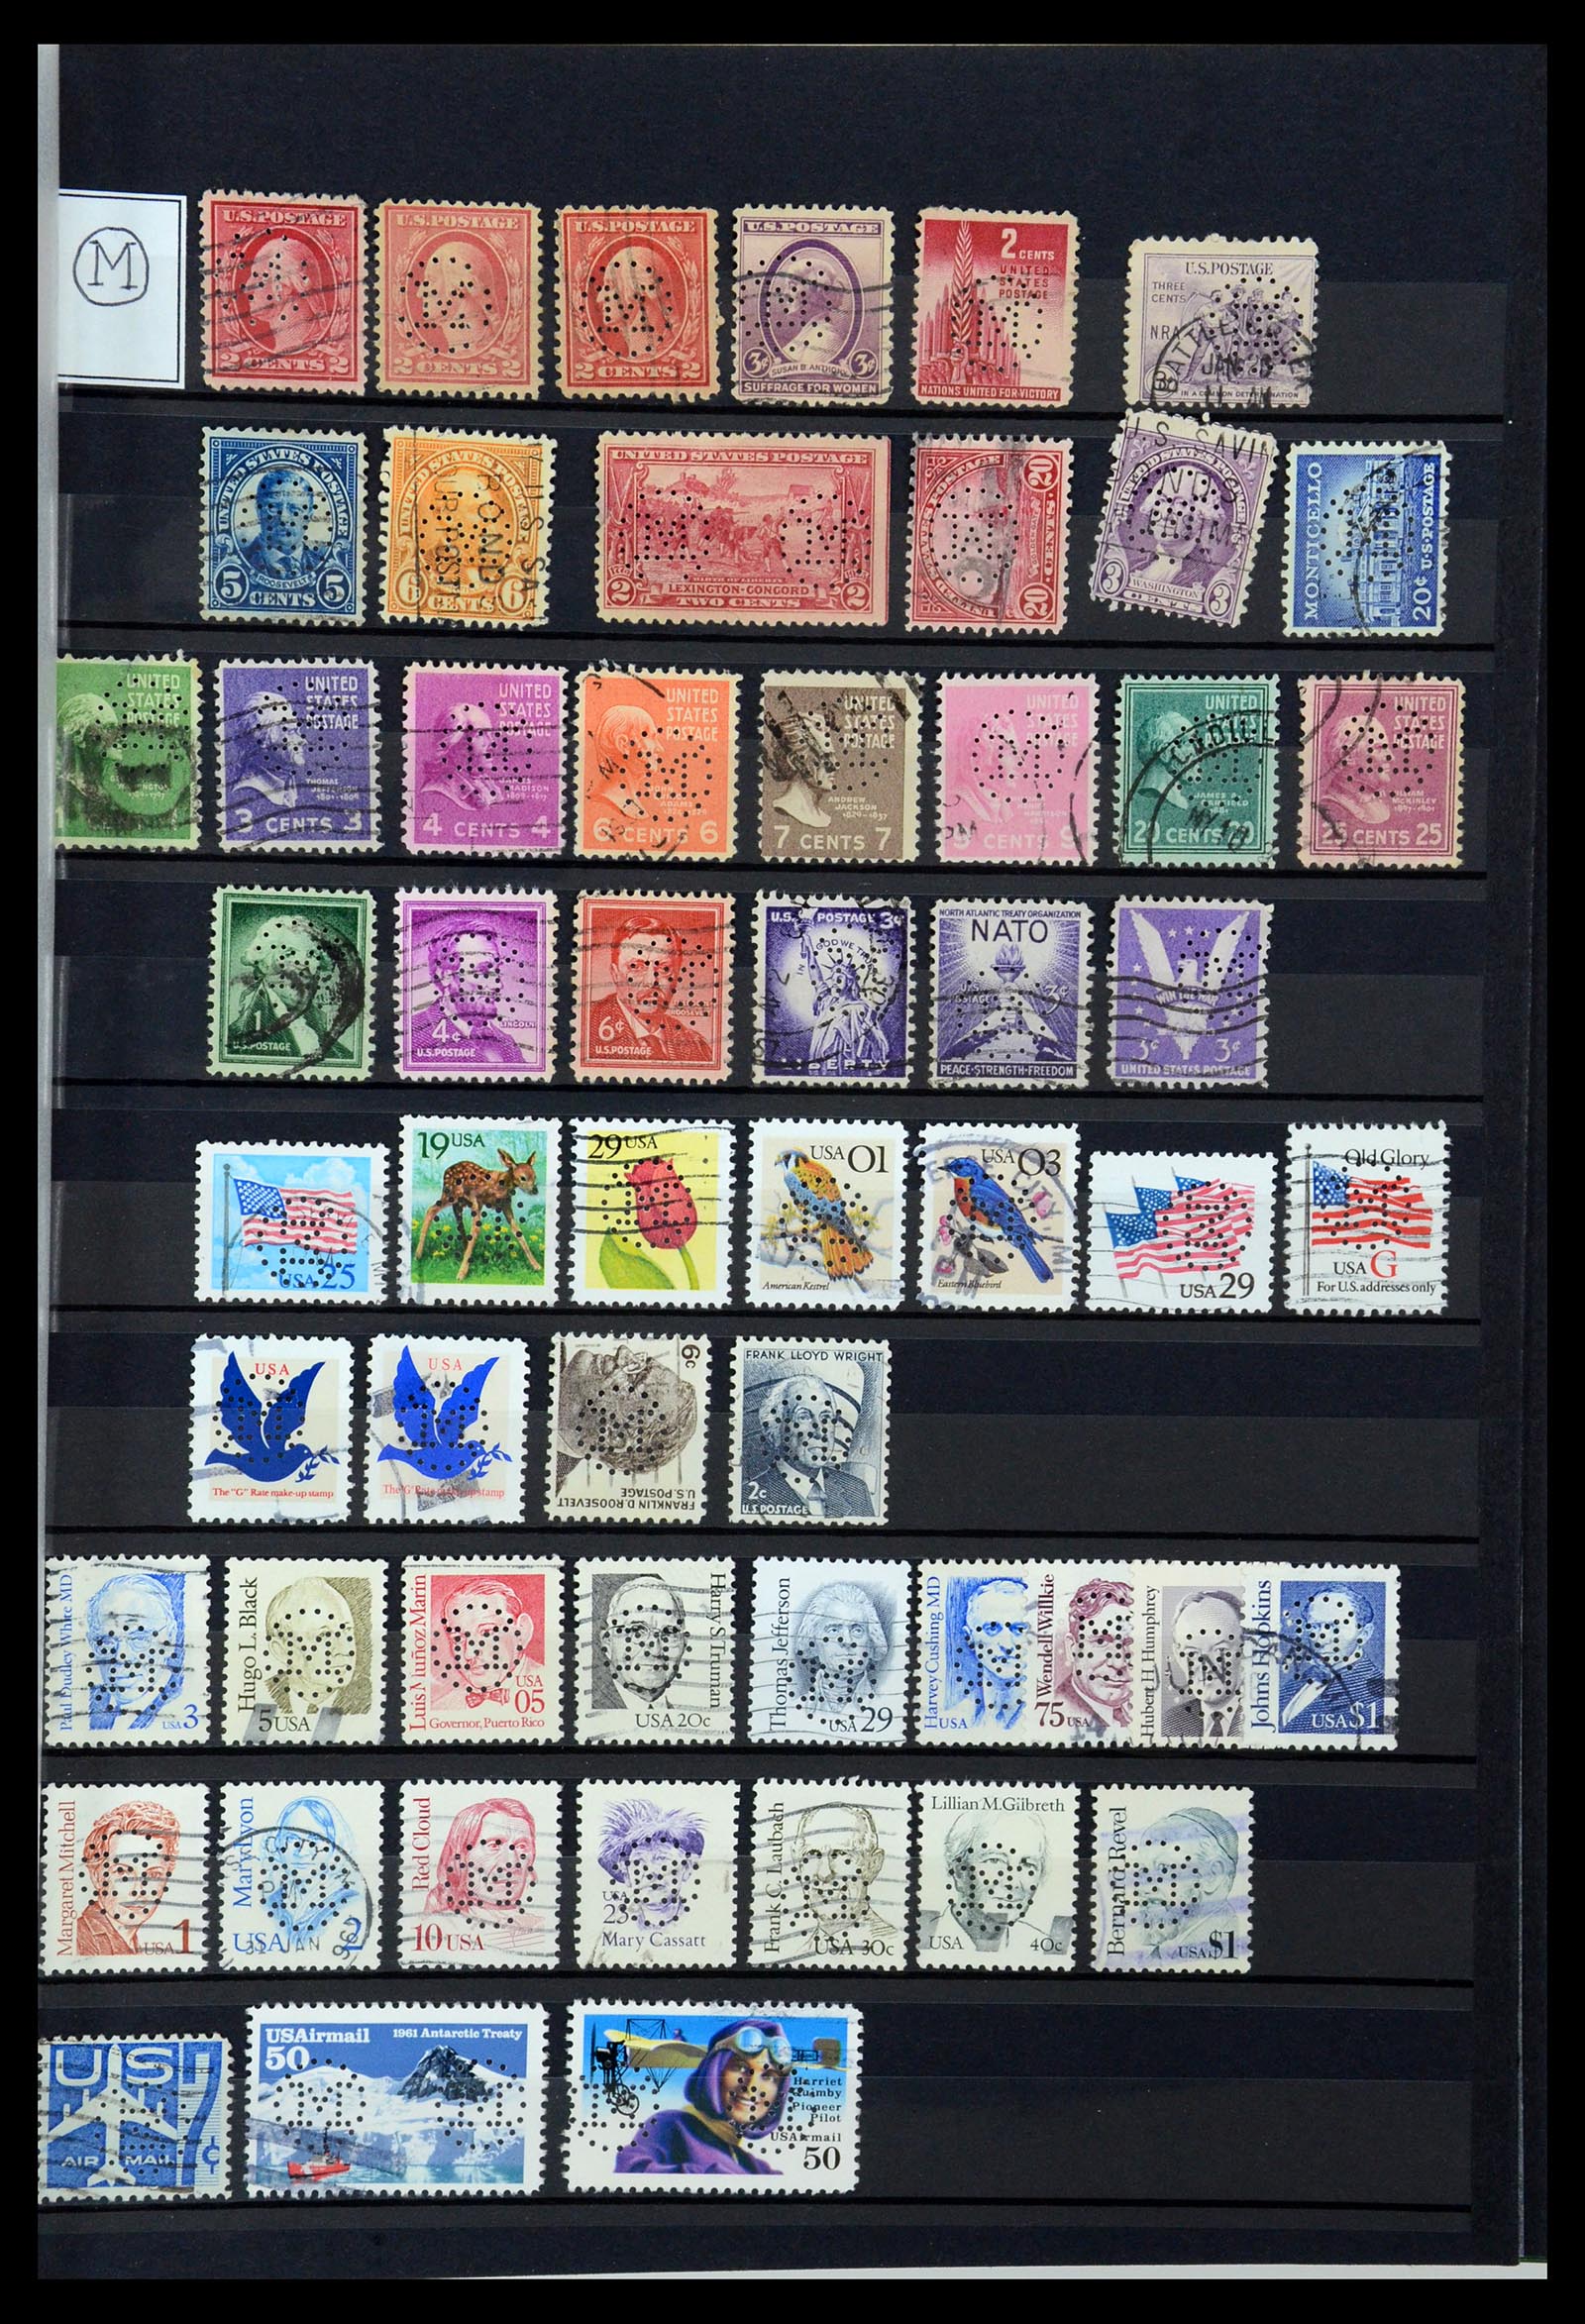 36388 083 - Stamp collection 36388 USA perfins.